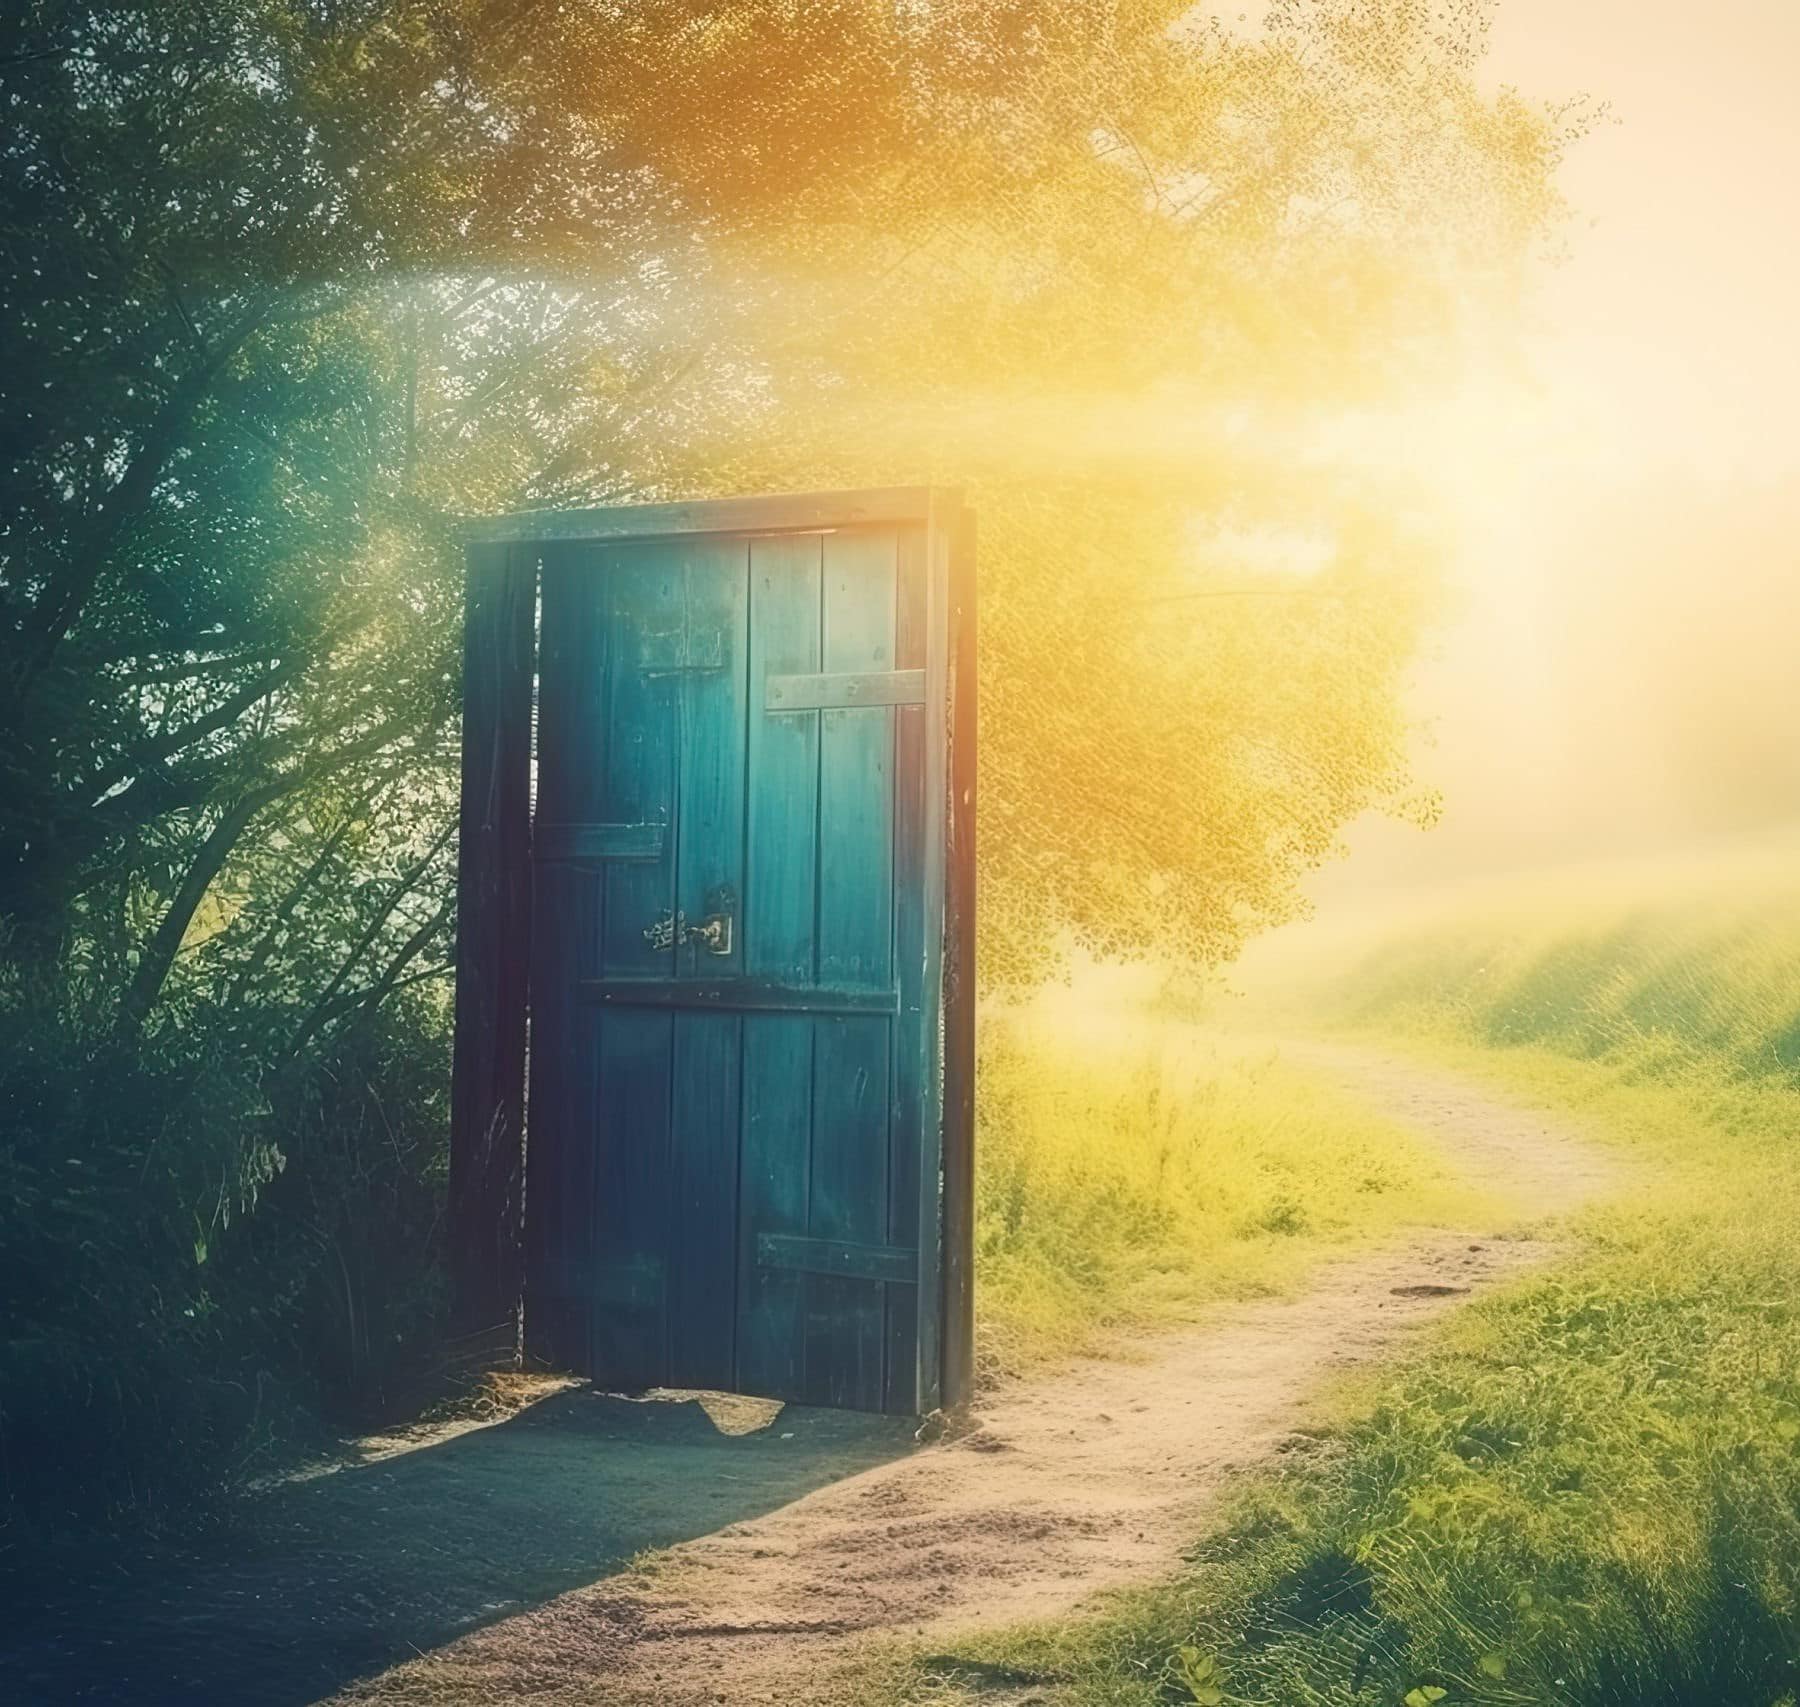 An open door in the middle of a dirt road